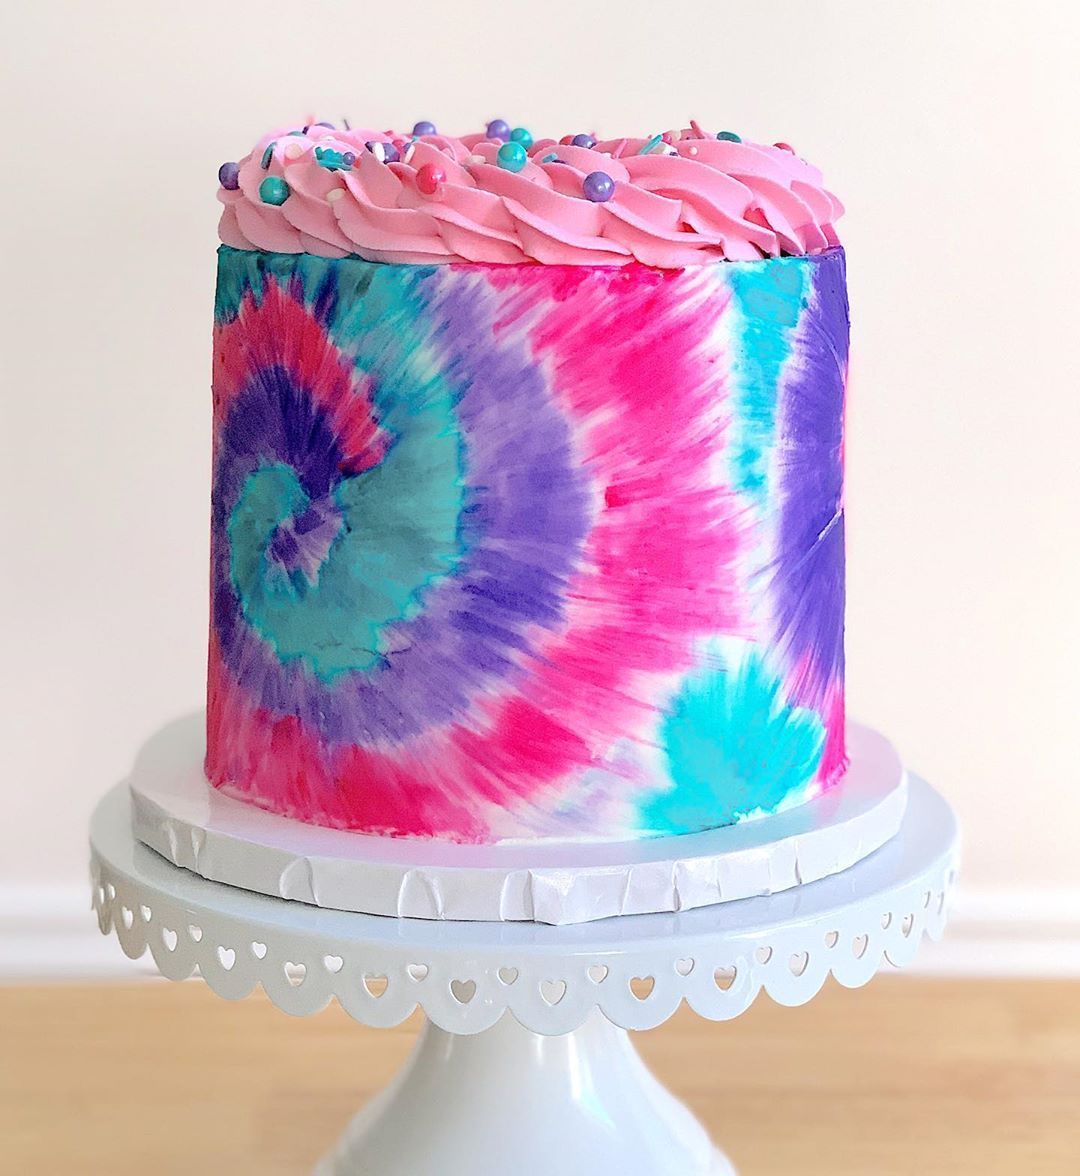 Southern Sprinkles Cakery on Instagram: “Tie dye...all day every day!! рџ’њрџ’™рџ’—рџ¤© Anyone else obsessed with the tie dye trend right now as much as I am?! I love how bright and vibrant…” -   18 cake Unicorn tie dye ideas